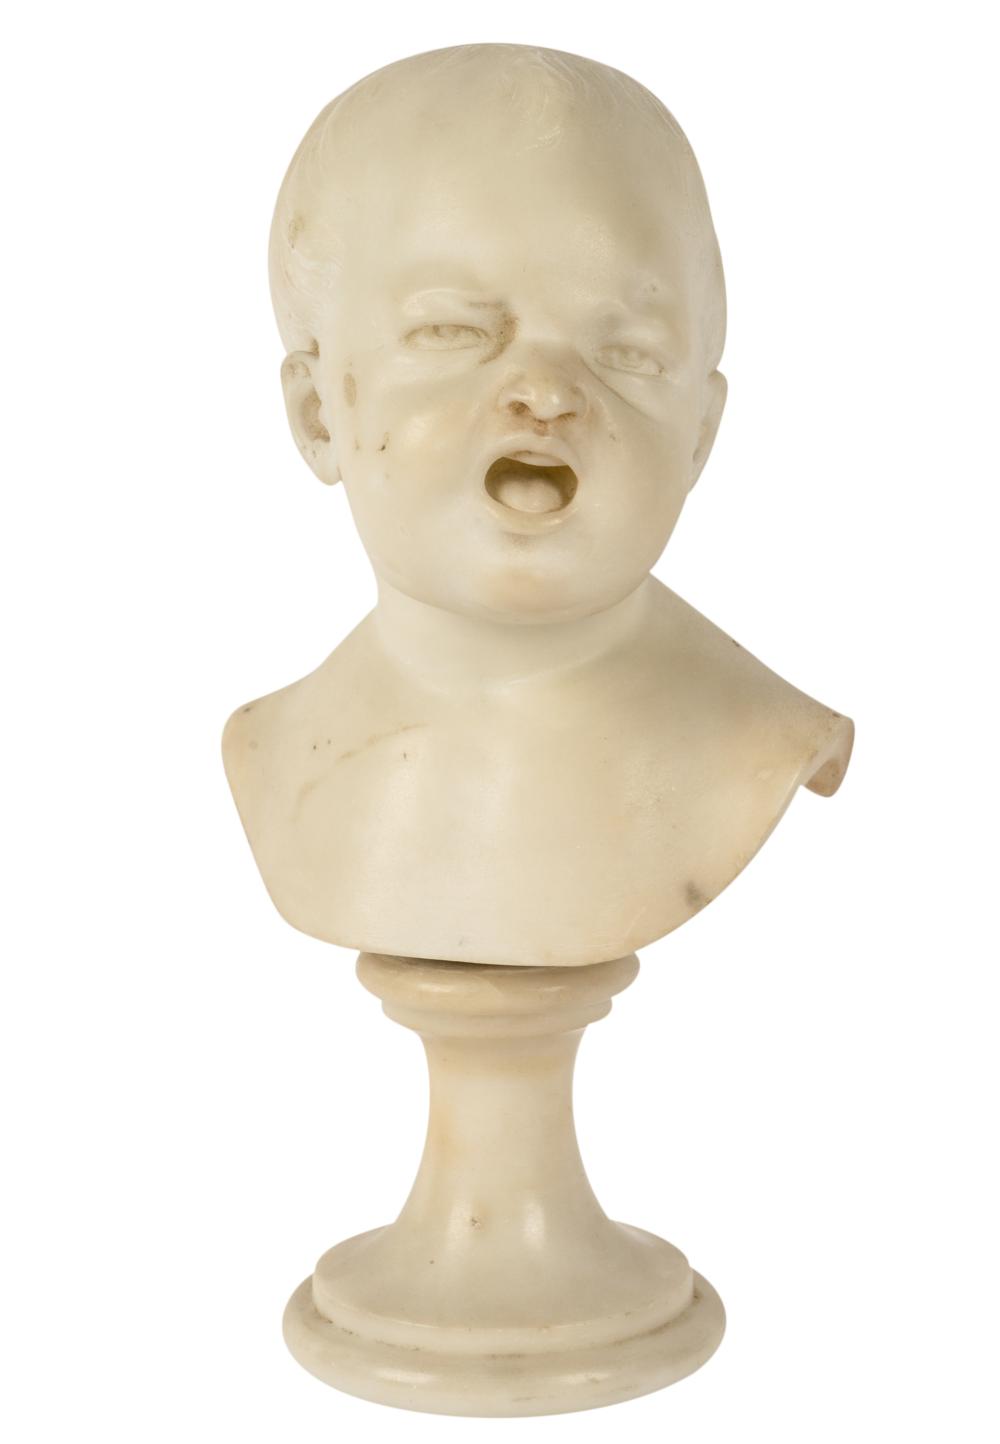 CARVED MARBLE BUST OF A BABYCarved 3b50ec